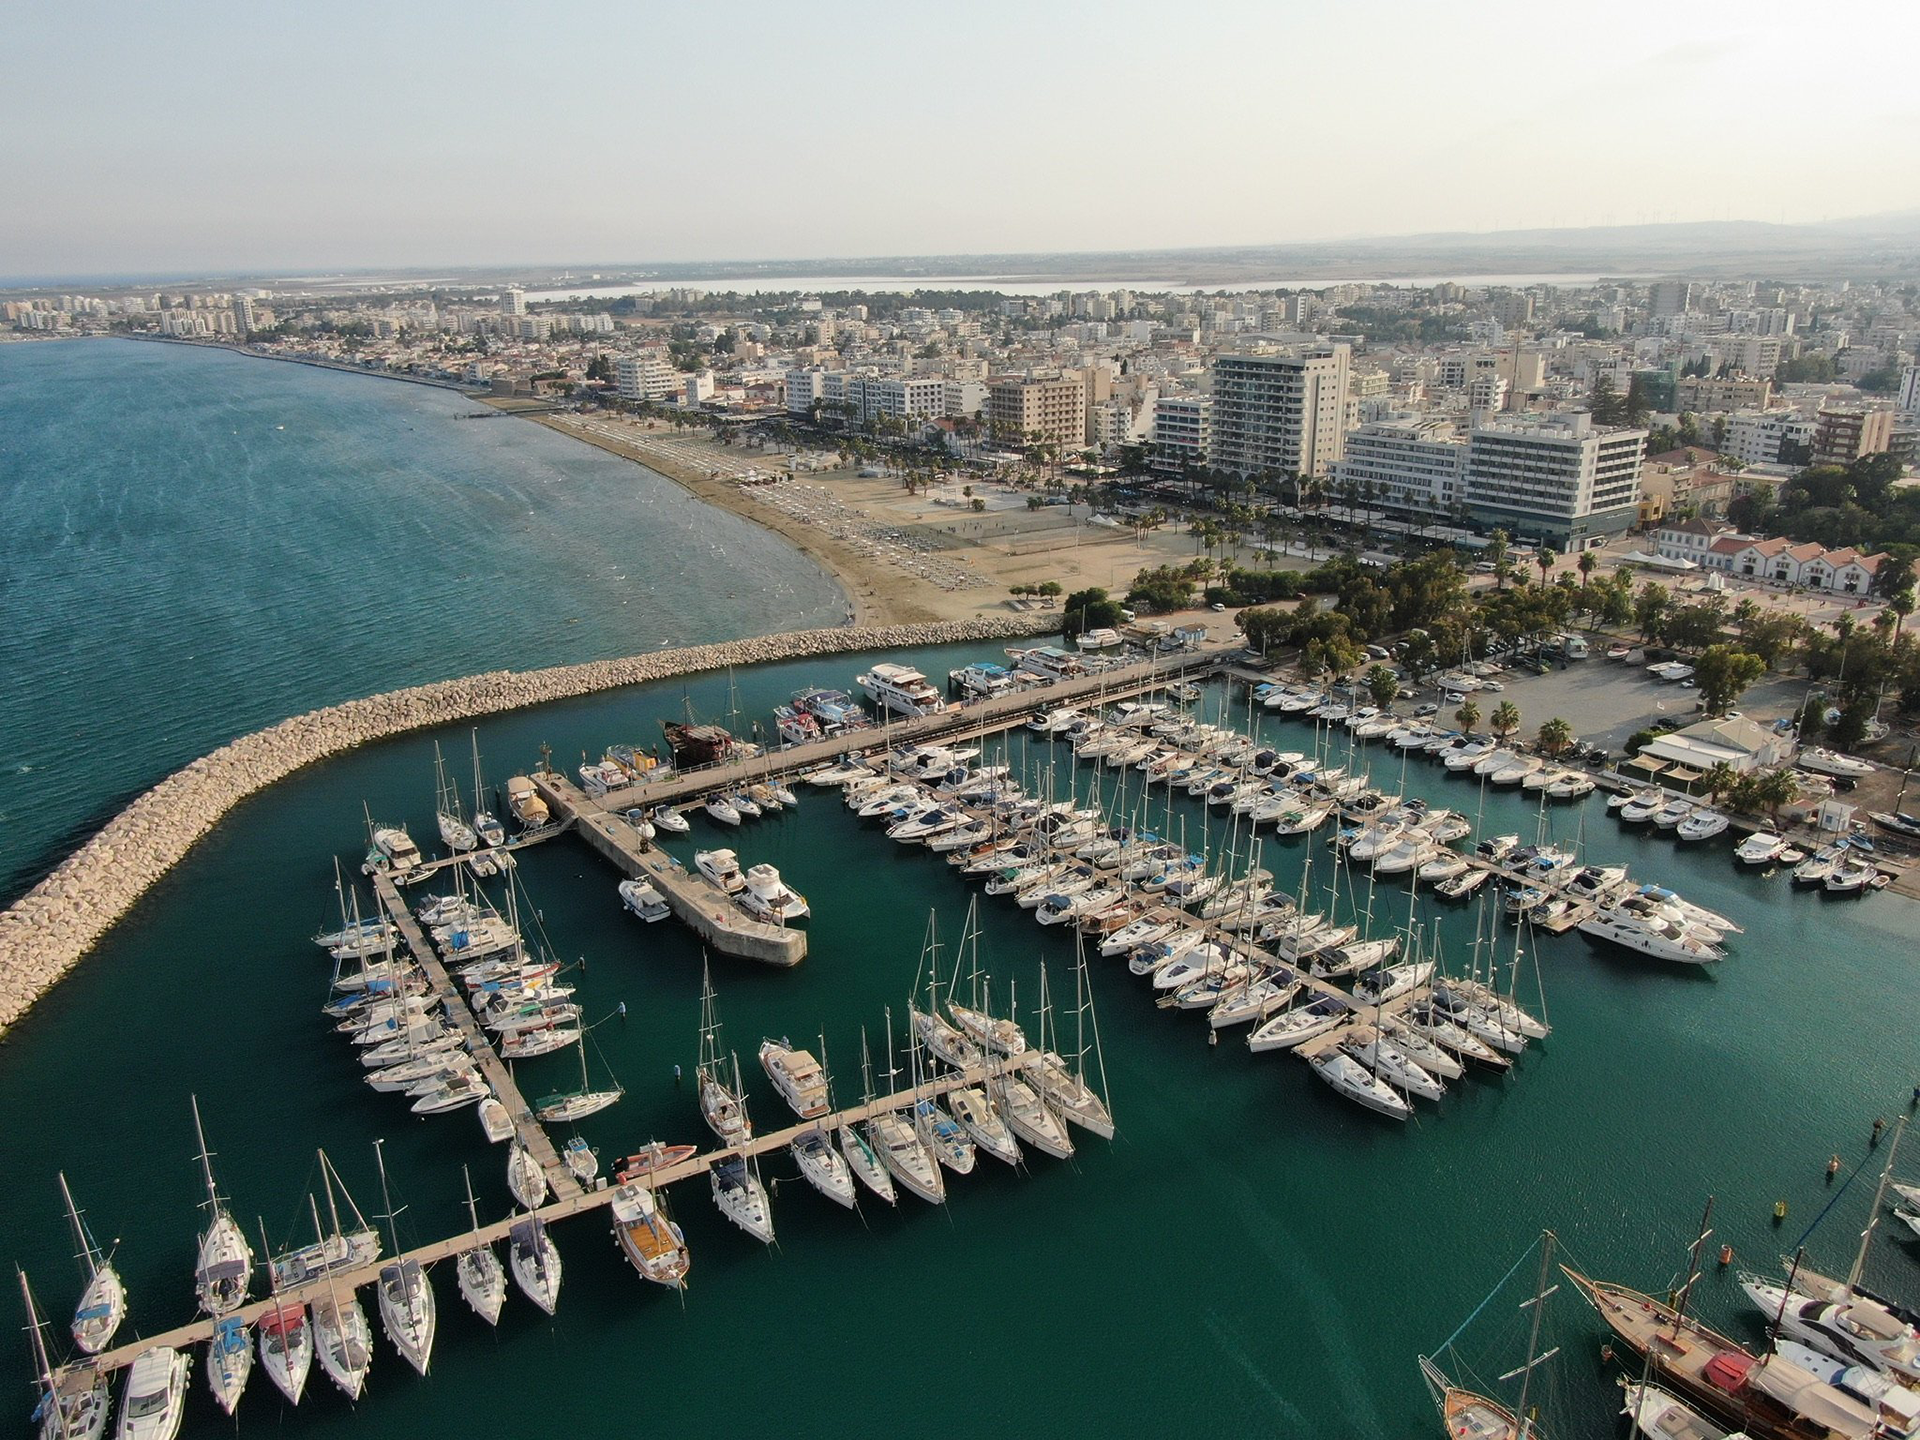 Larnaca Marina Pier restoration is nearing the final stages